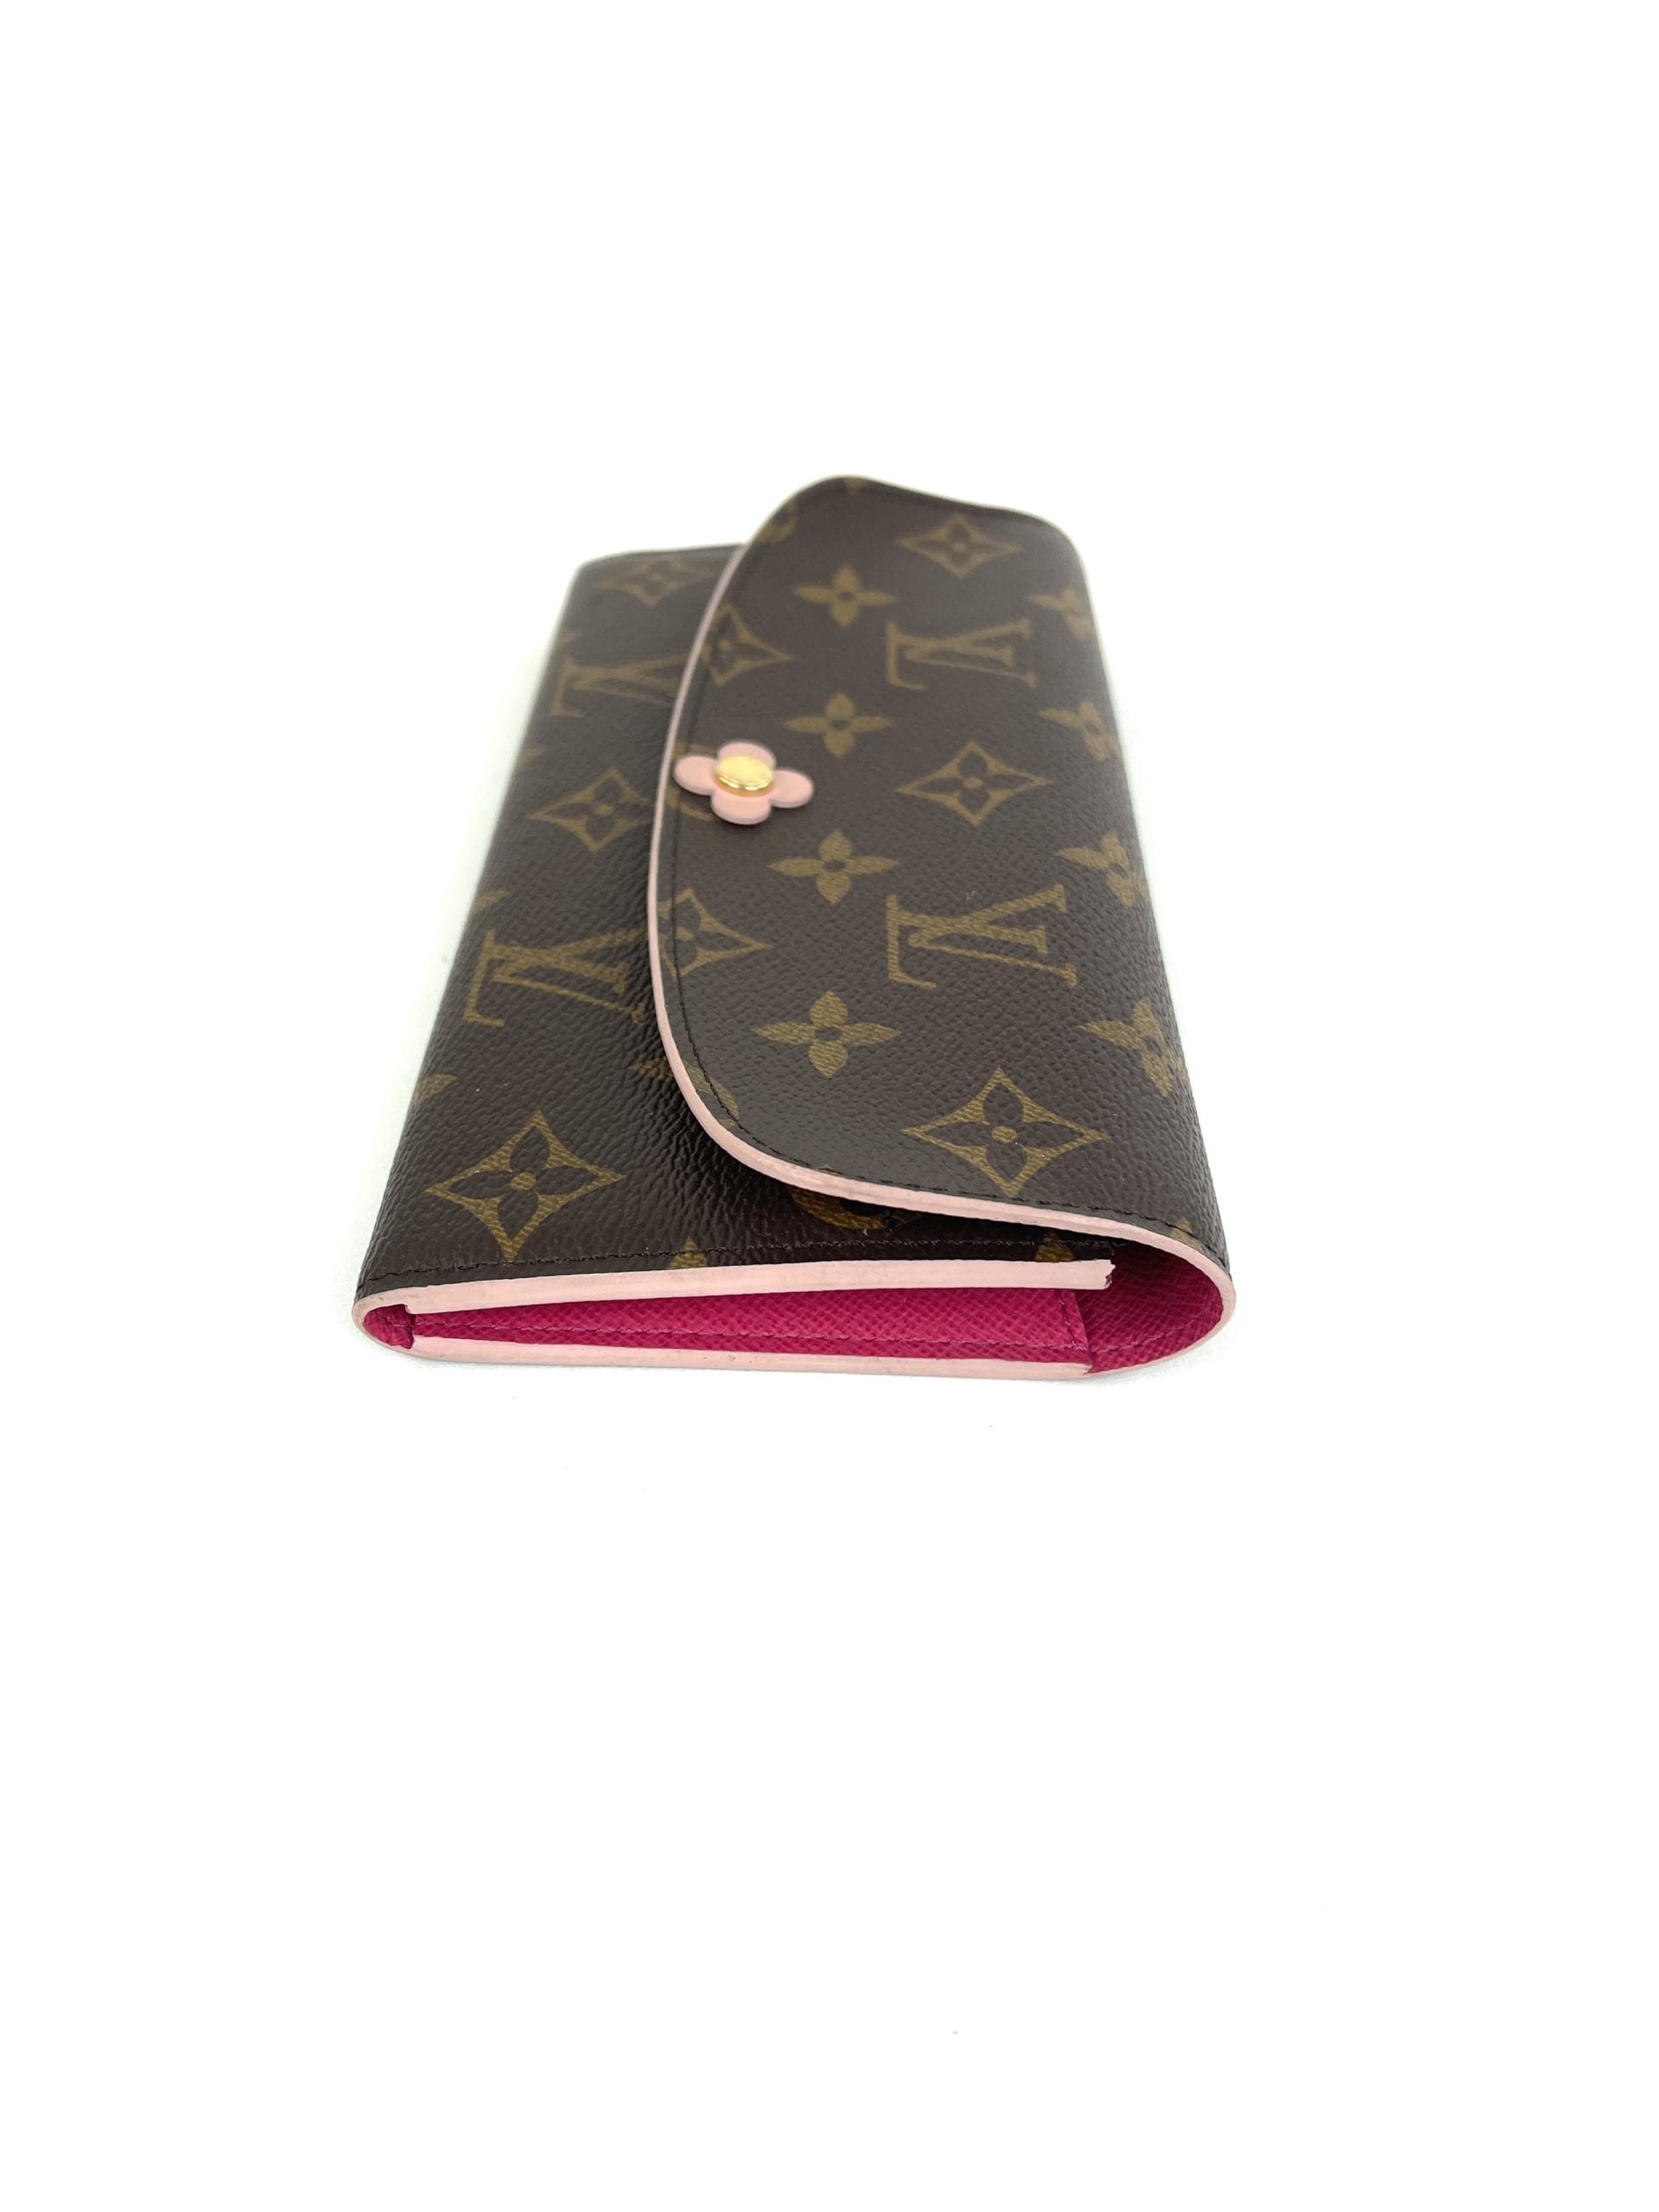 Pre-owned Louis Vuitton Emilie Bloom Flower Wallet Pink Monogram Limited  Edition